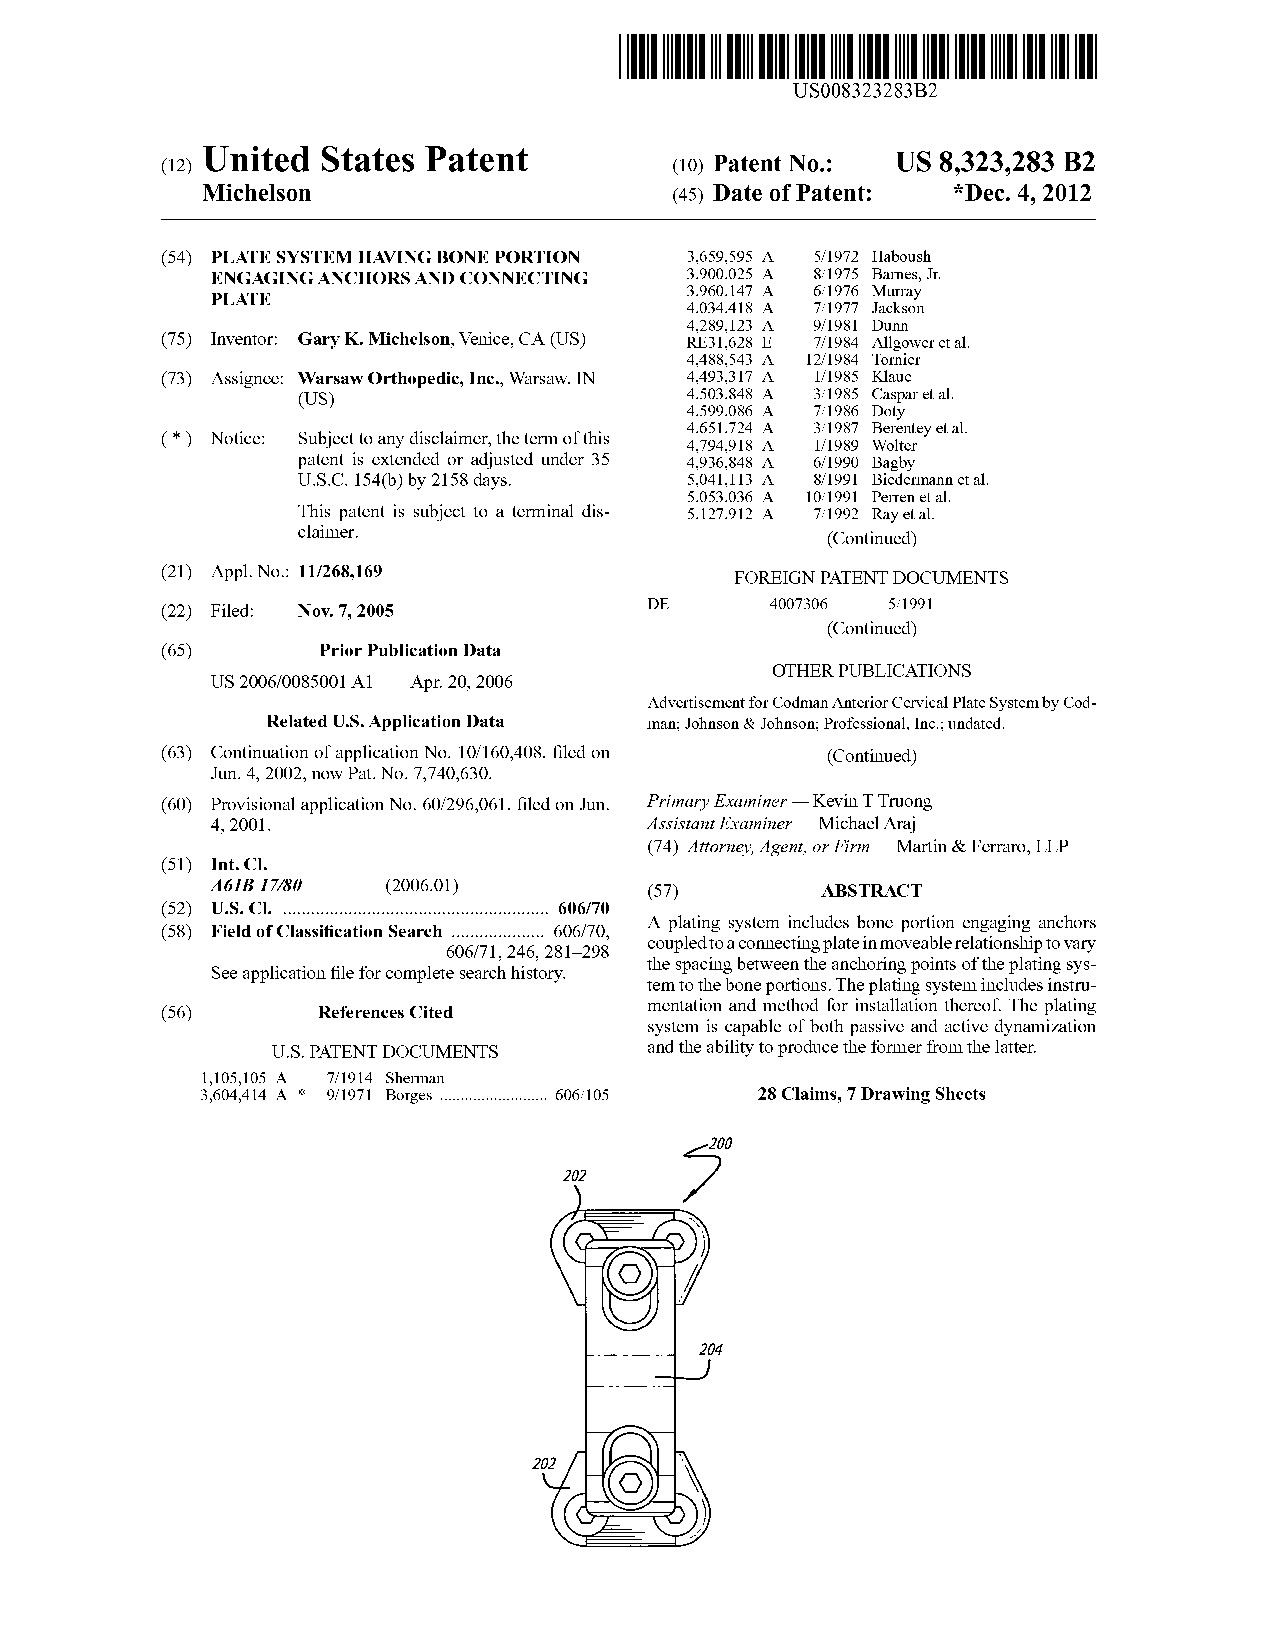 Plate system having bone portion engaging anchors and connecting plate - Patent 8,323,283